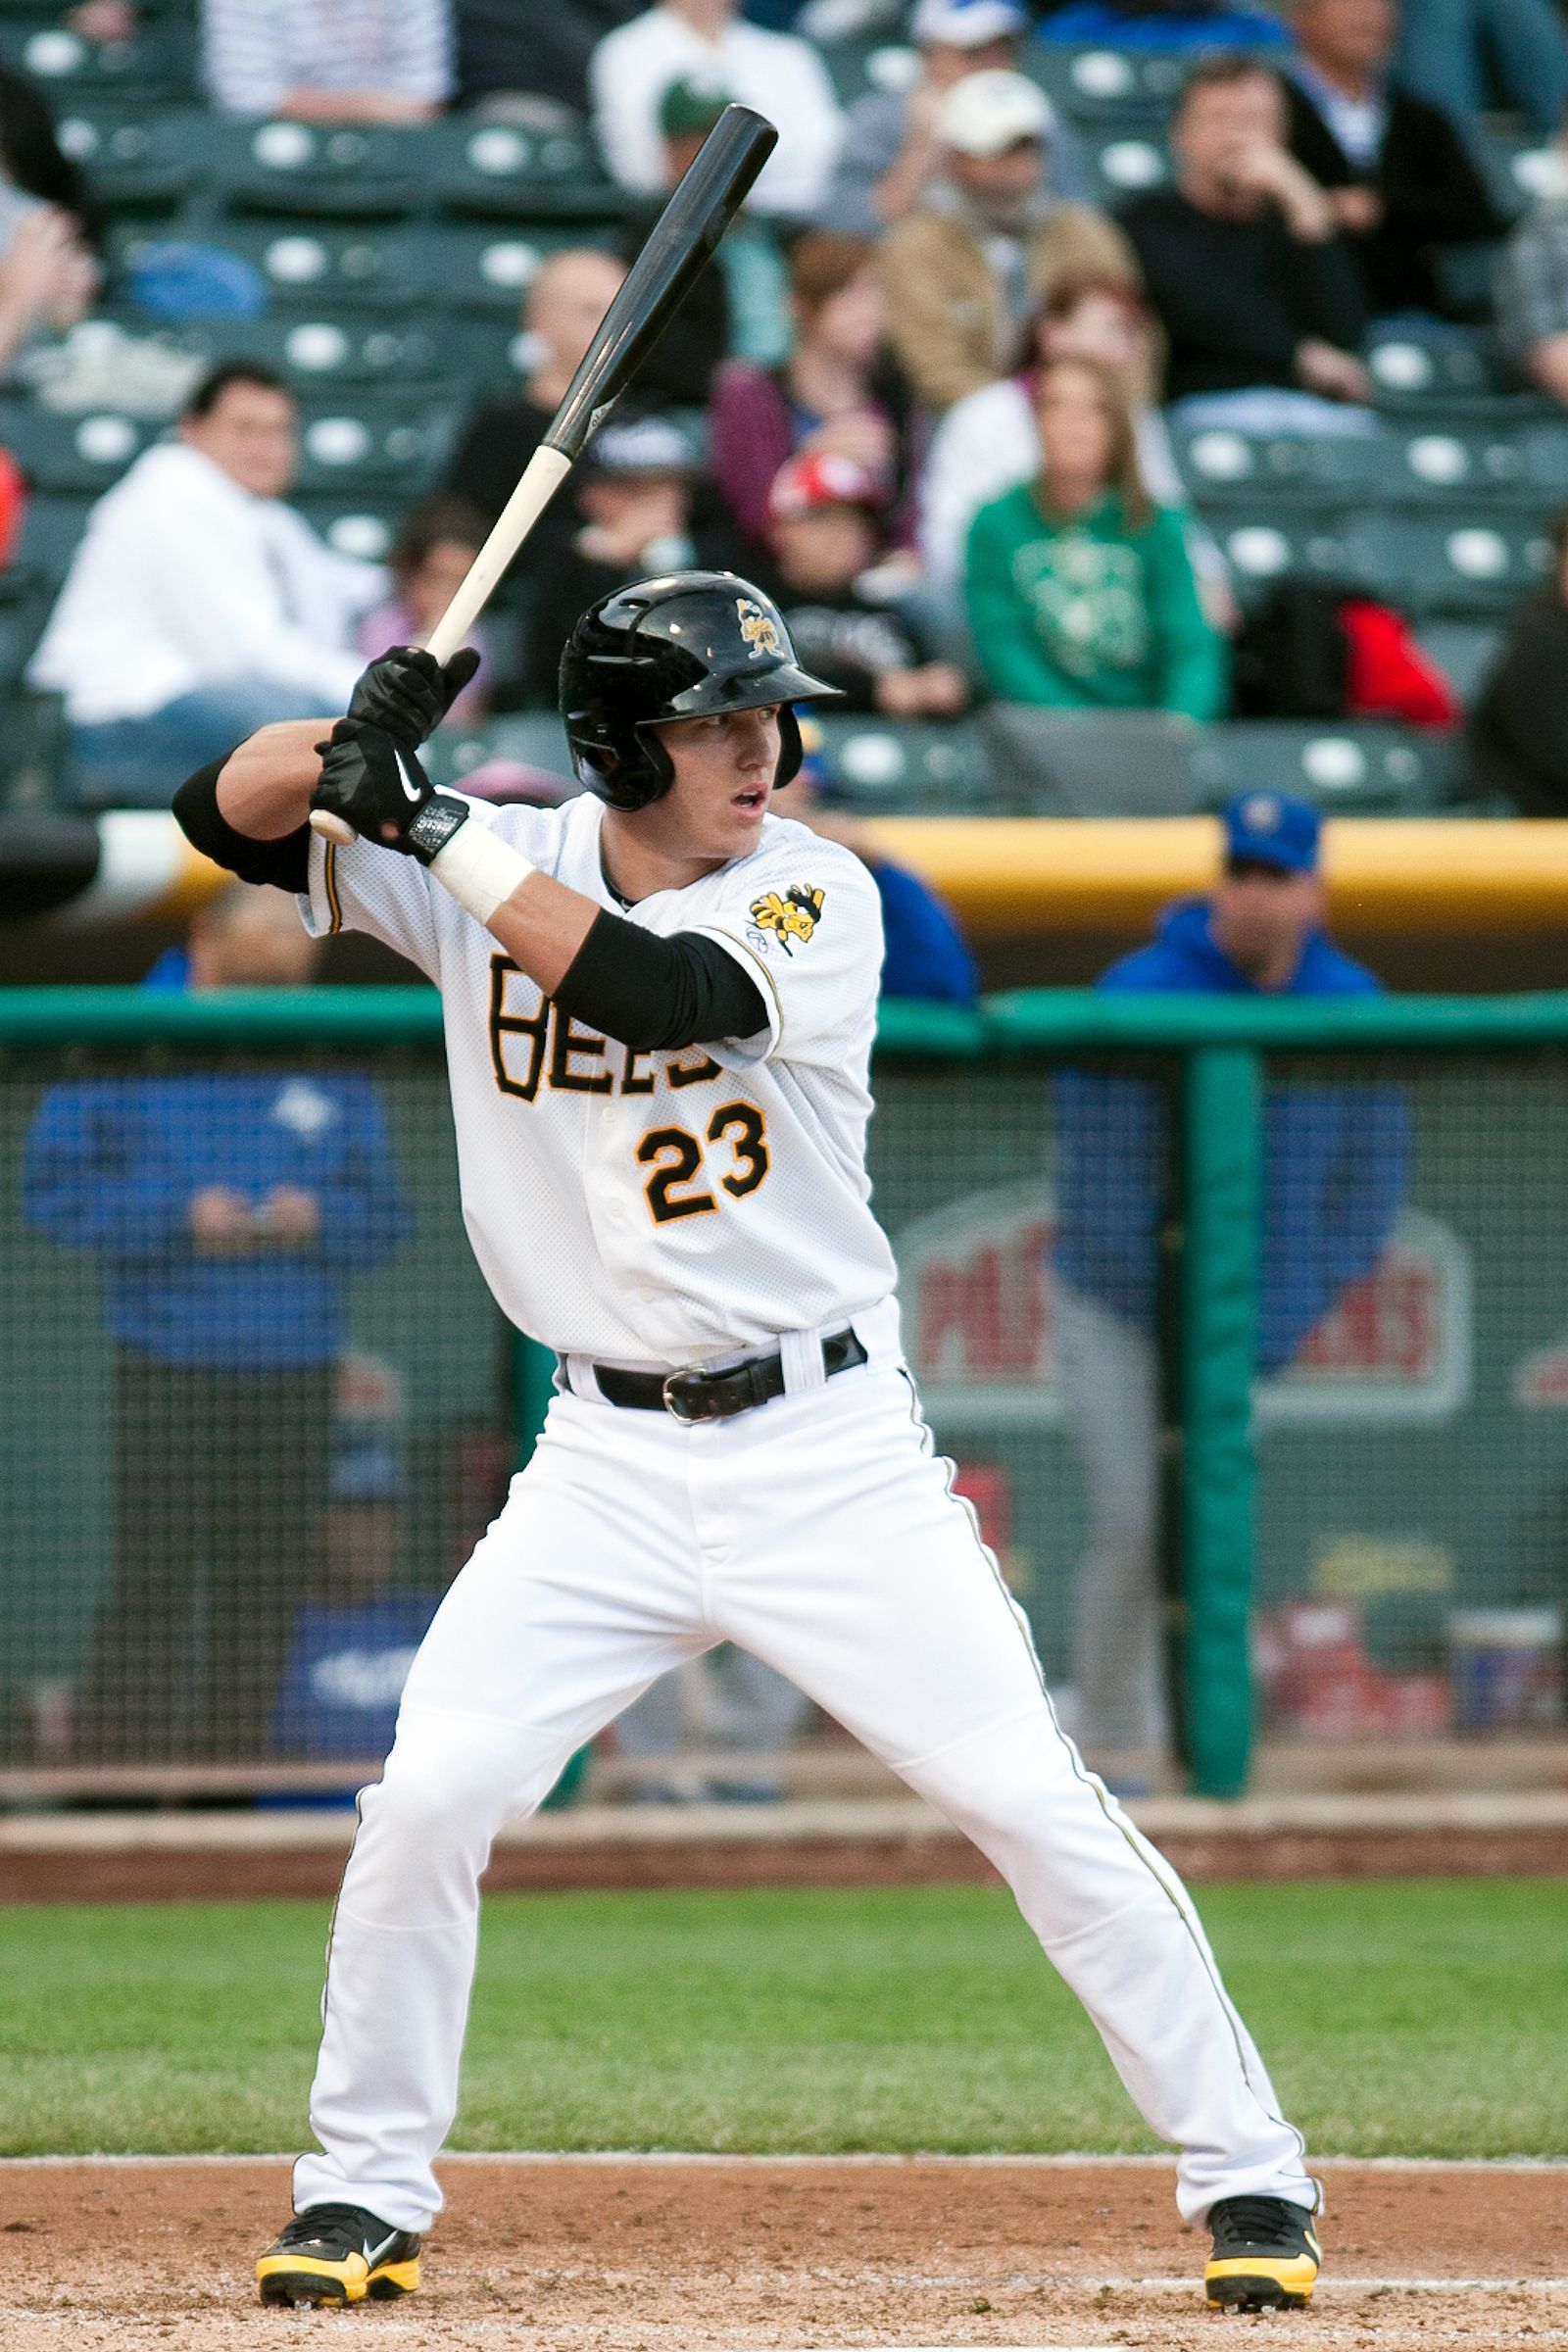 The Salt Lake Bees' manager is barely older than some players, but